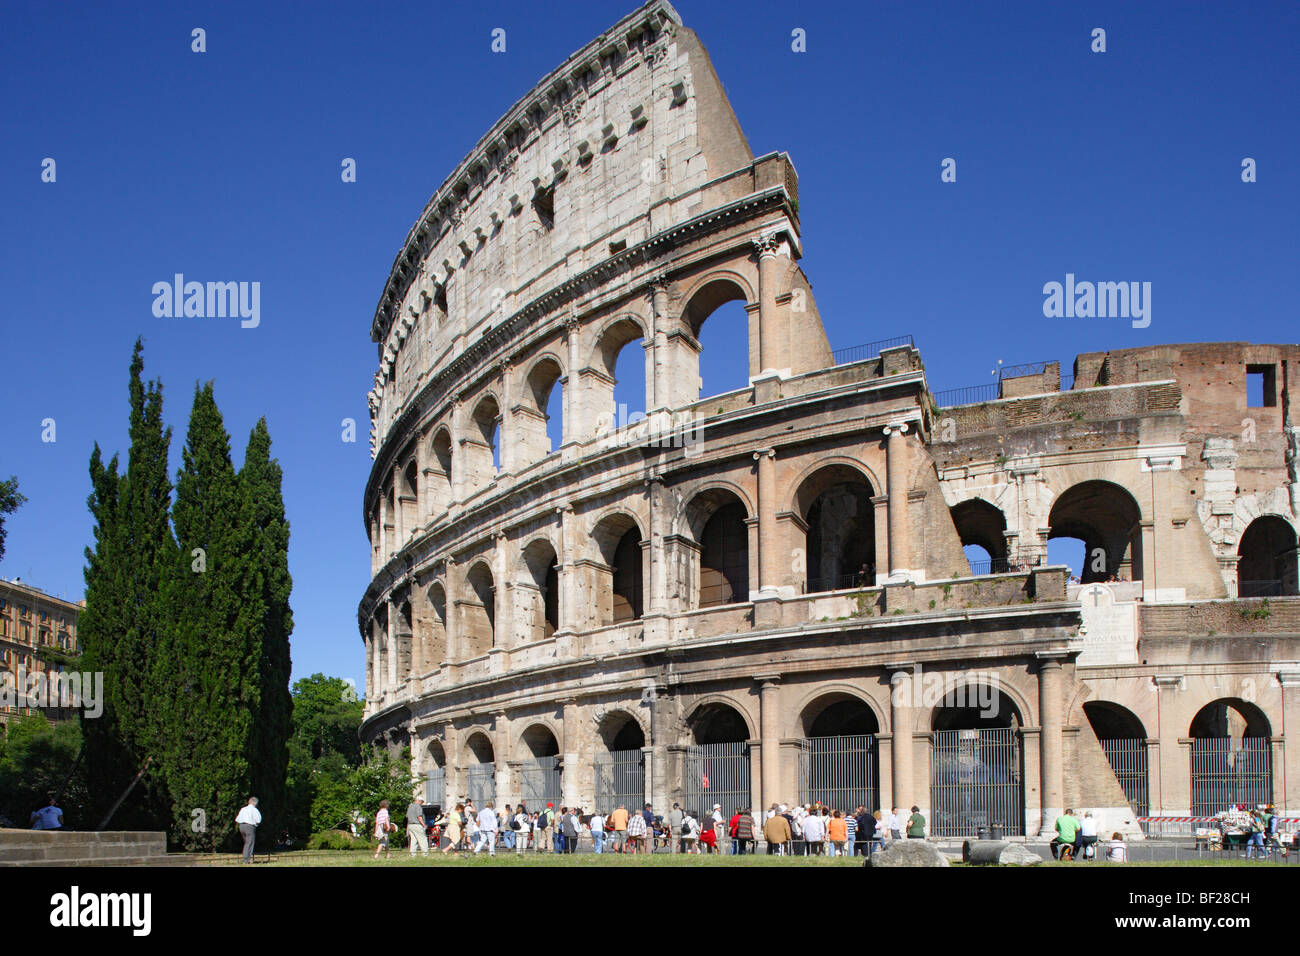 Tourists in front of the Colosseum under blue sky, Rome, Italy, Europe Stock Photo